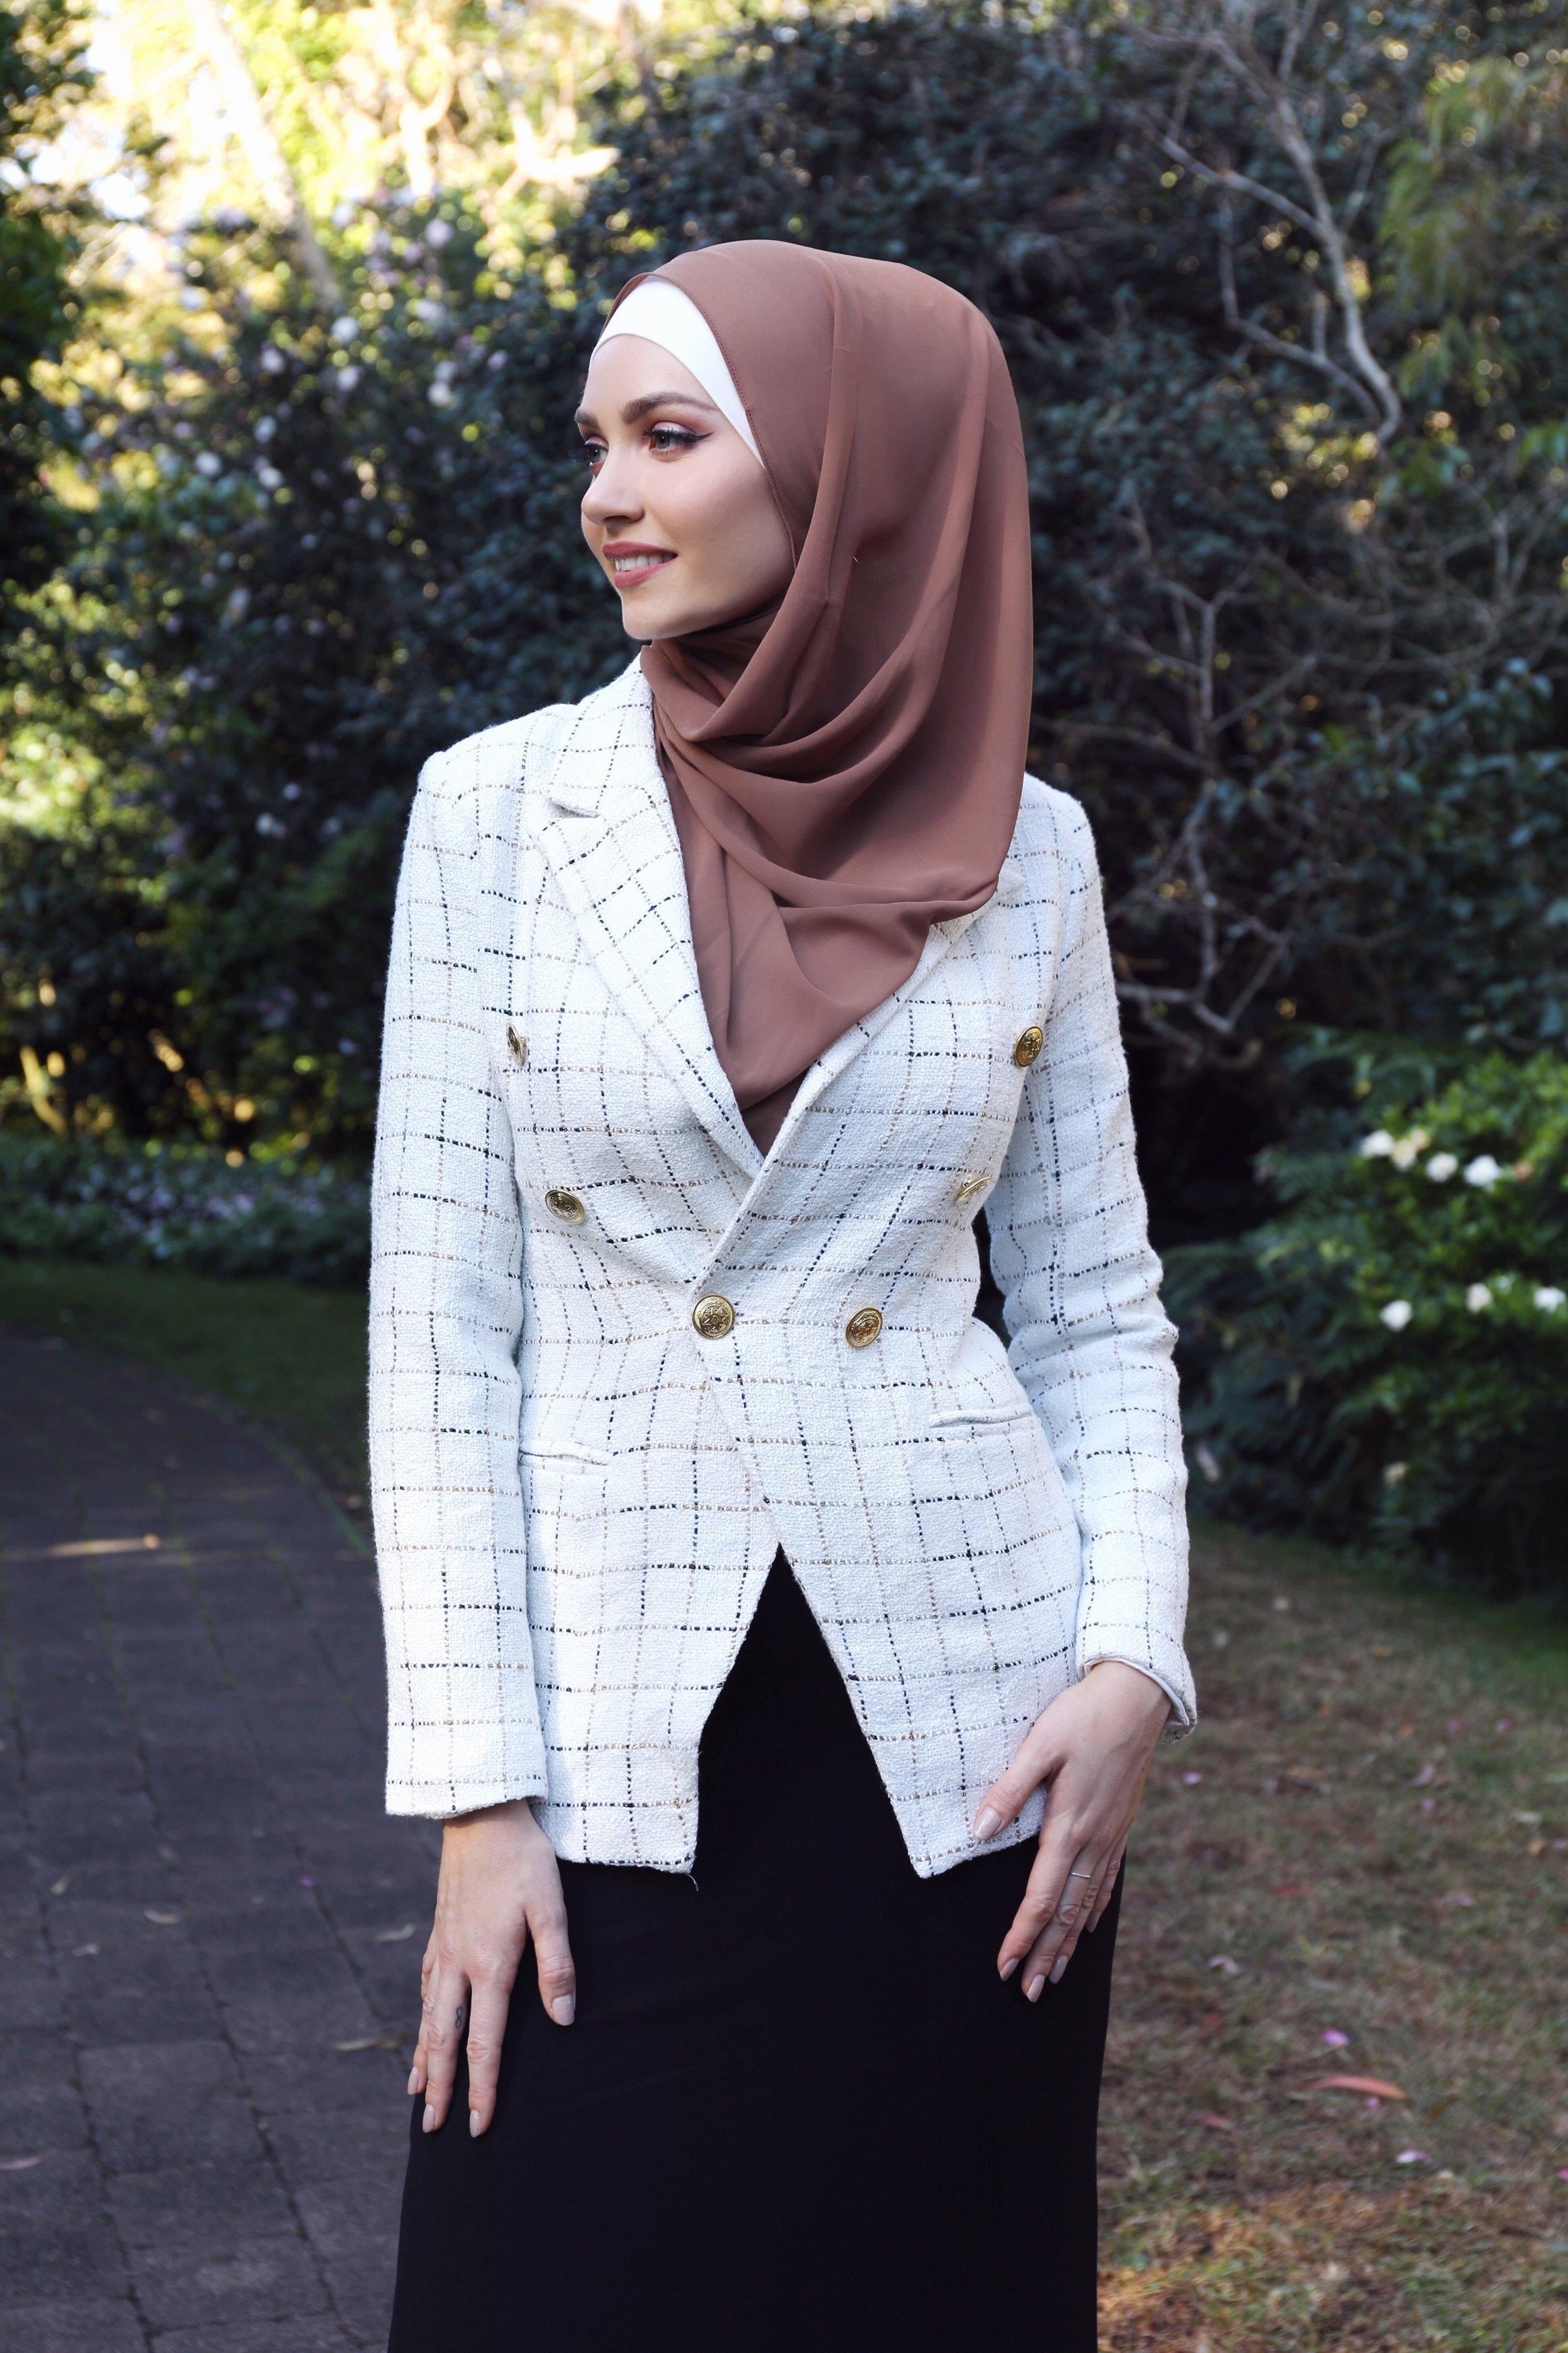 Off White and Gold Tweed Checked Blazer with Gold Buttons - Divinity Collection